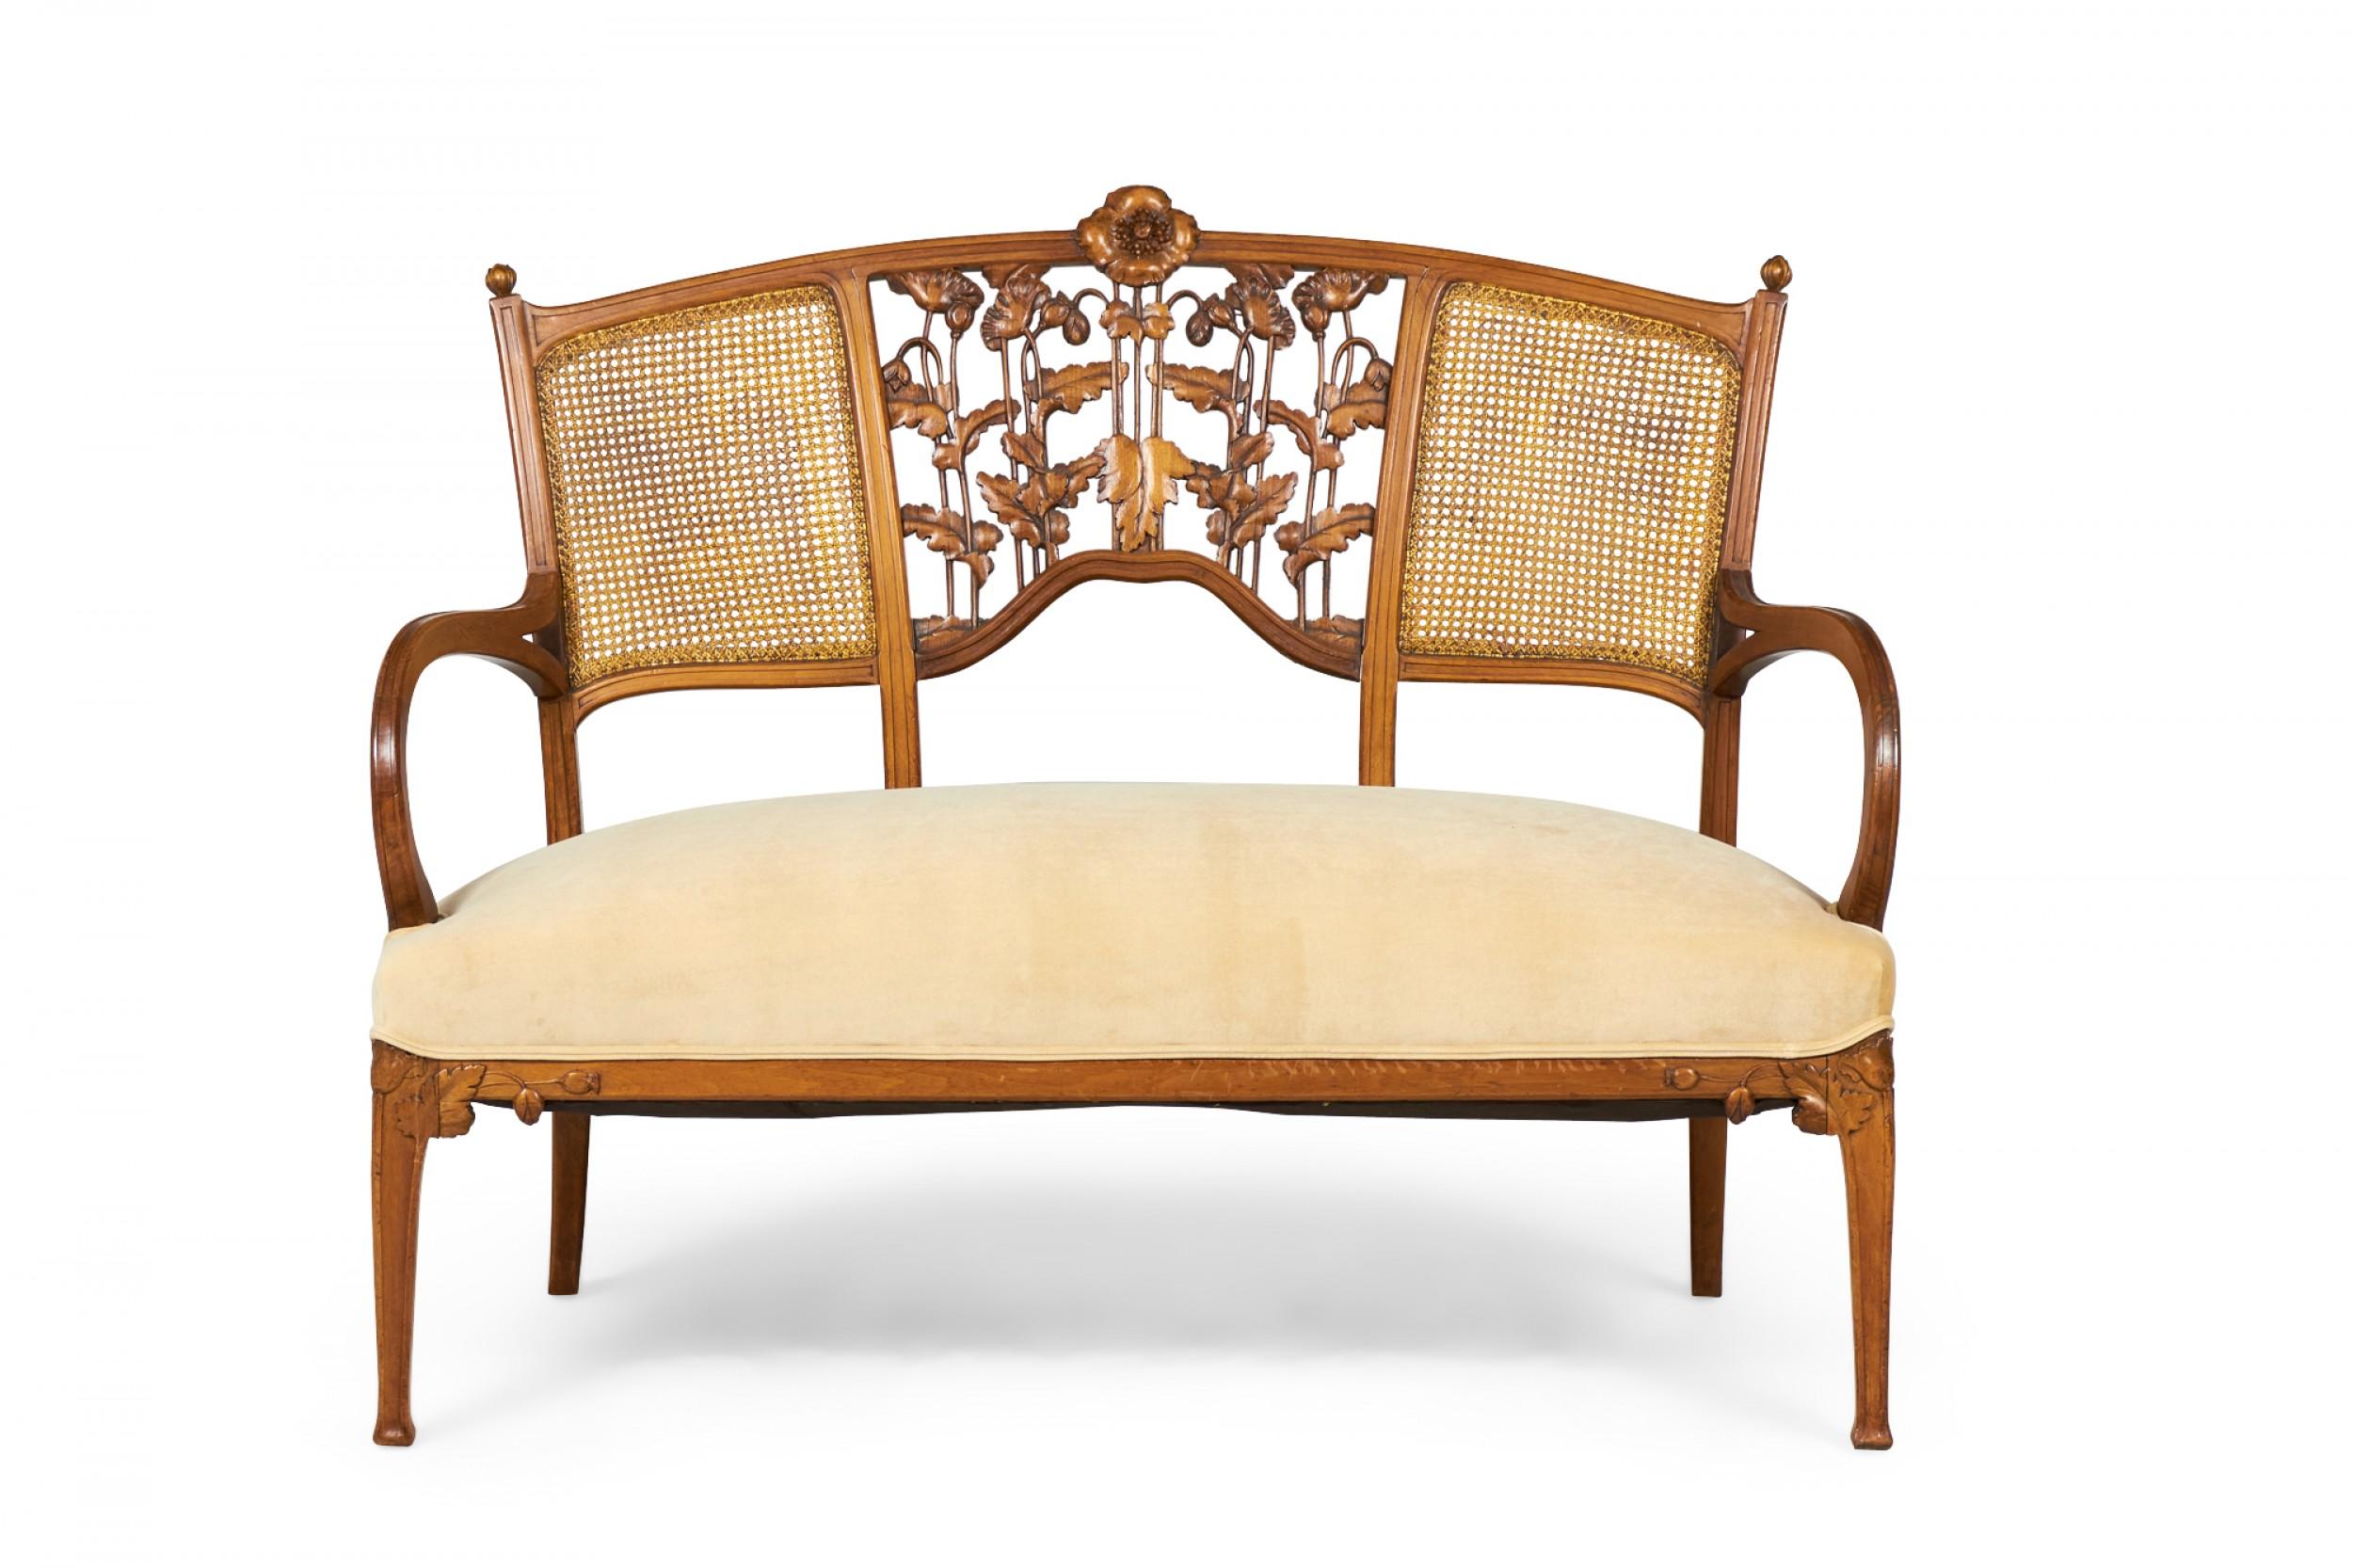 Set of 5 French Art Nouveau walnut living room / salon set with floral filigree back & gold upholstery (Settee: 49